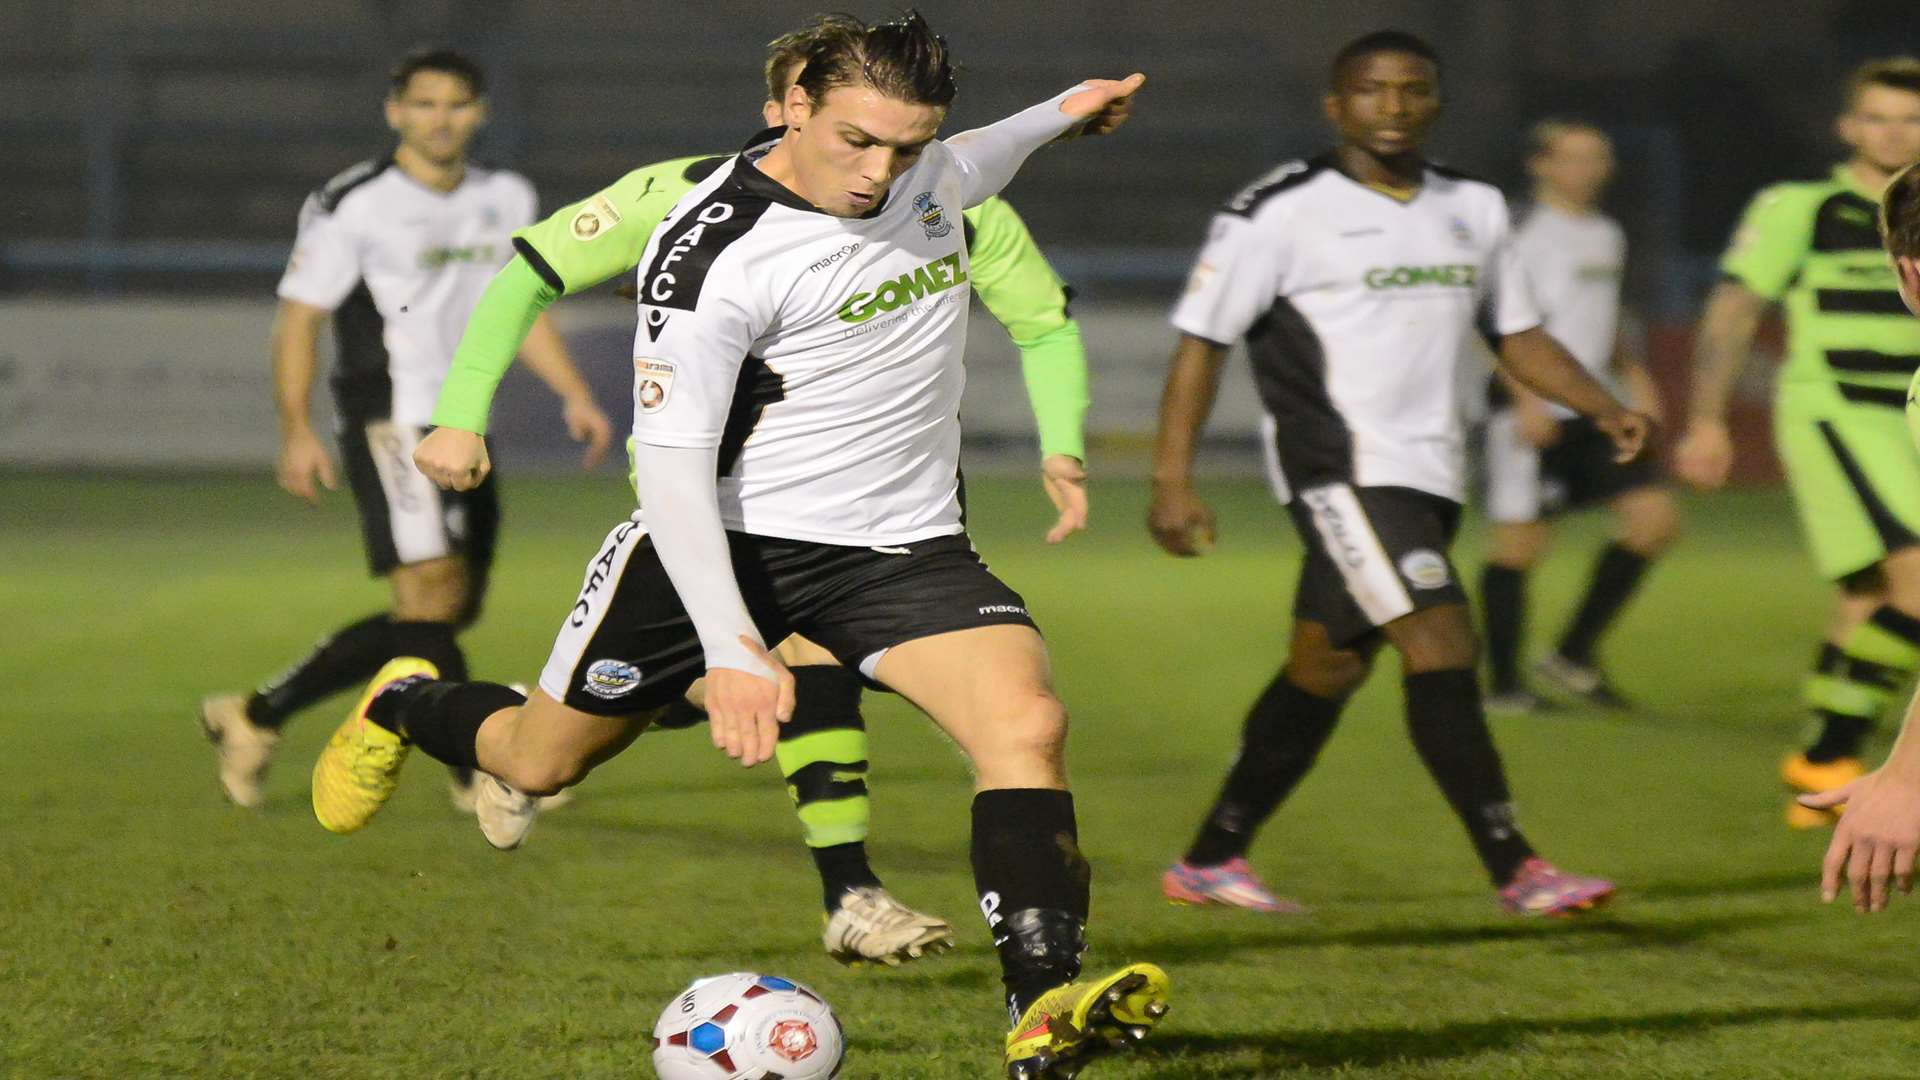 Liam Bellamy in action for Dover in the Vanarama Conference clash with Forest Green Rovers earlier this season